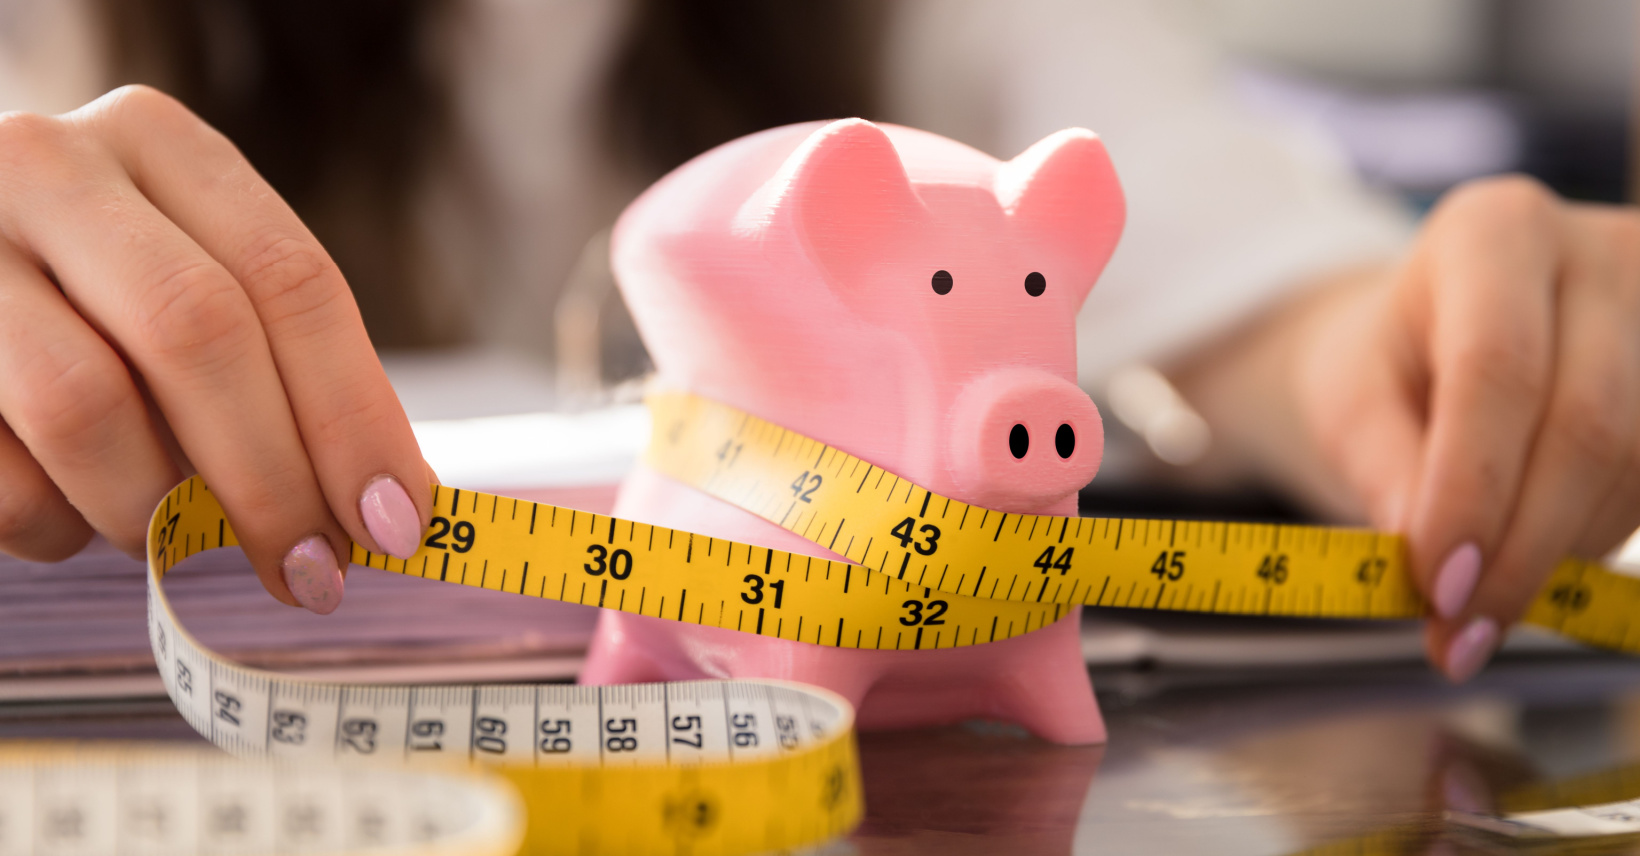 Top 10 Tips for Stretching a Tight Budget